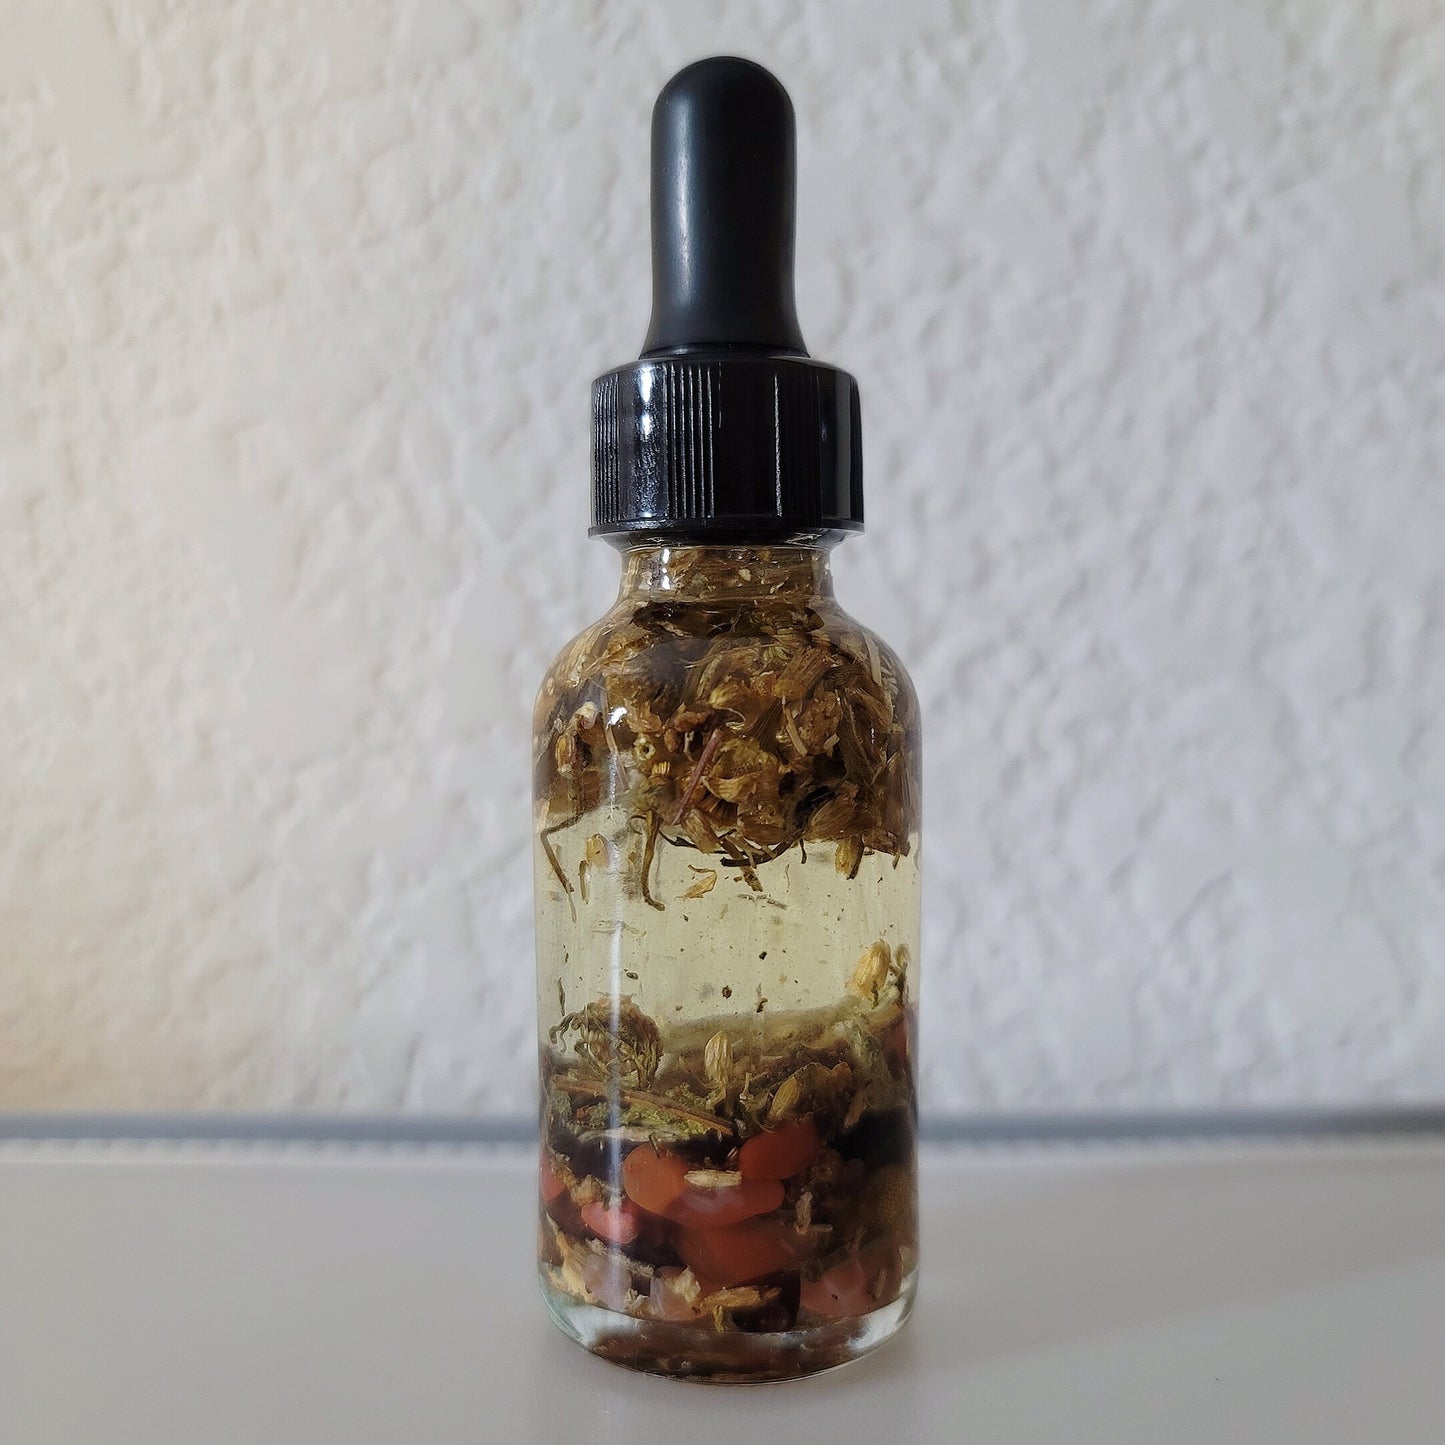 Eir Goddess Oil | Ritual & Spell Work, Altars, Invocation, Manifestation, and Intentions